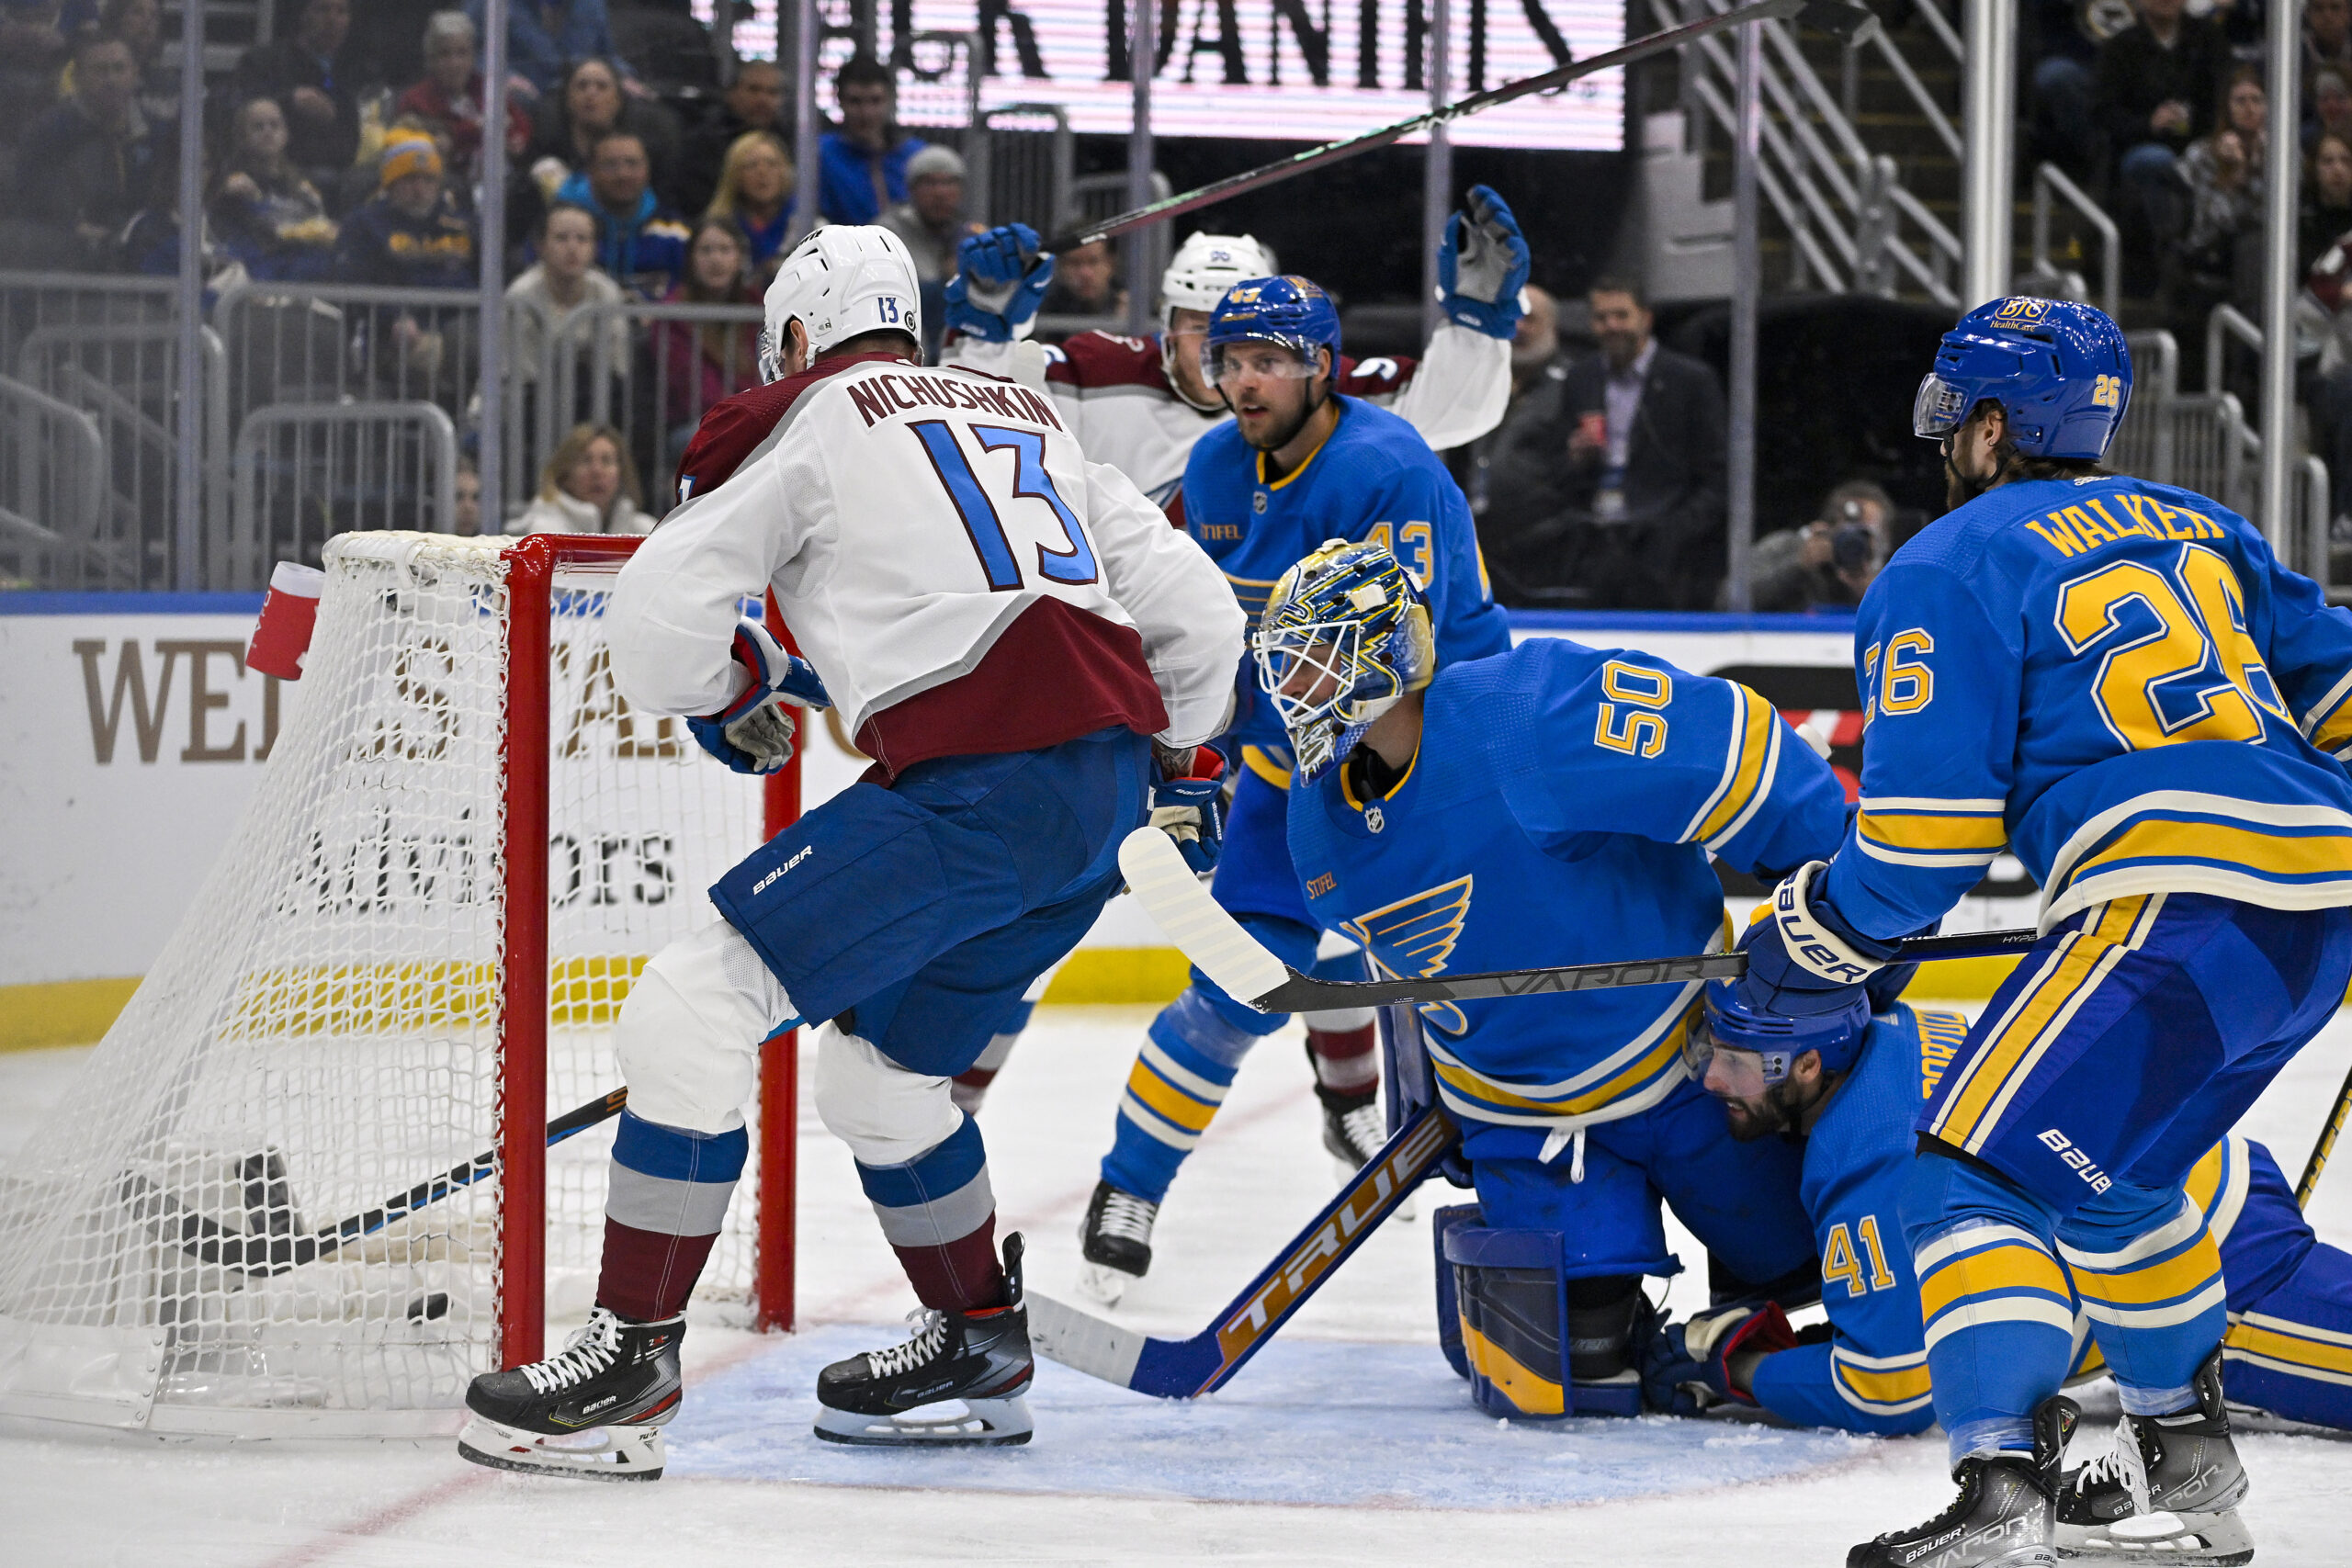 St. Louis Blues: How Accurate Were Our Season Predictions?